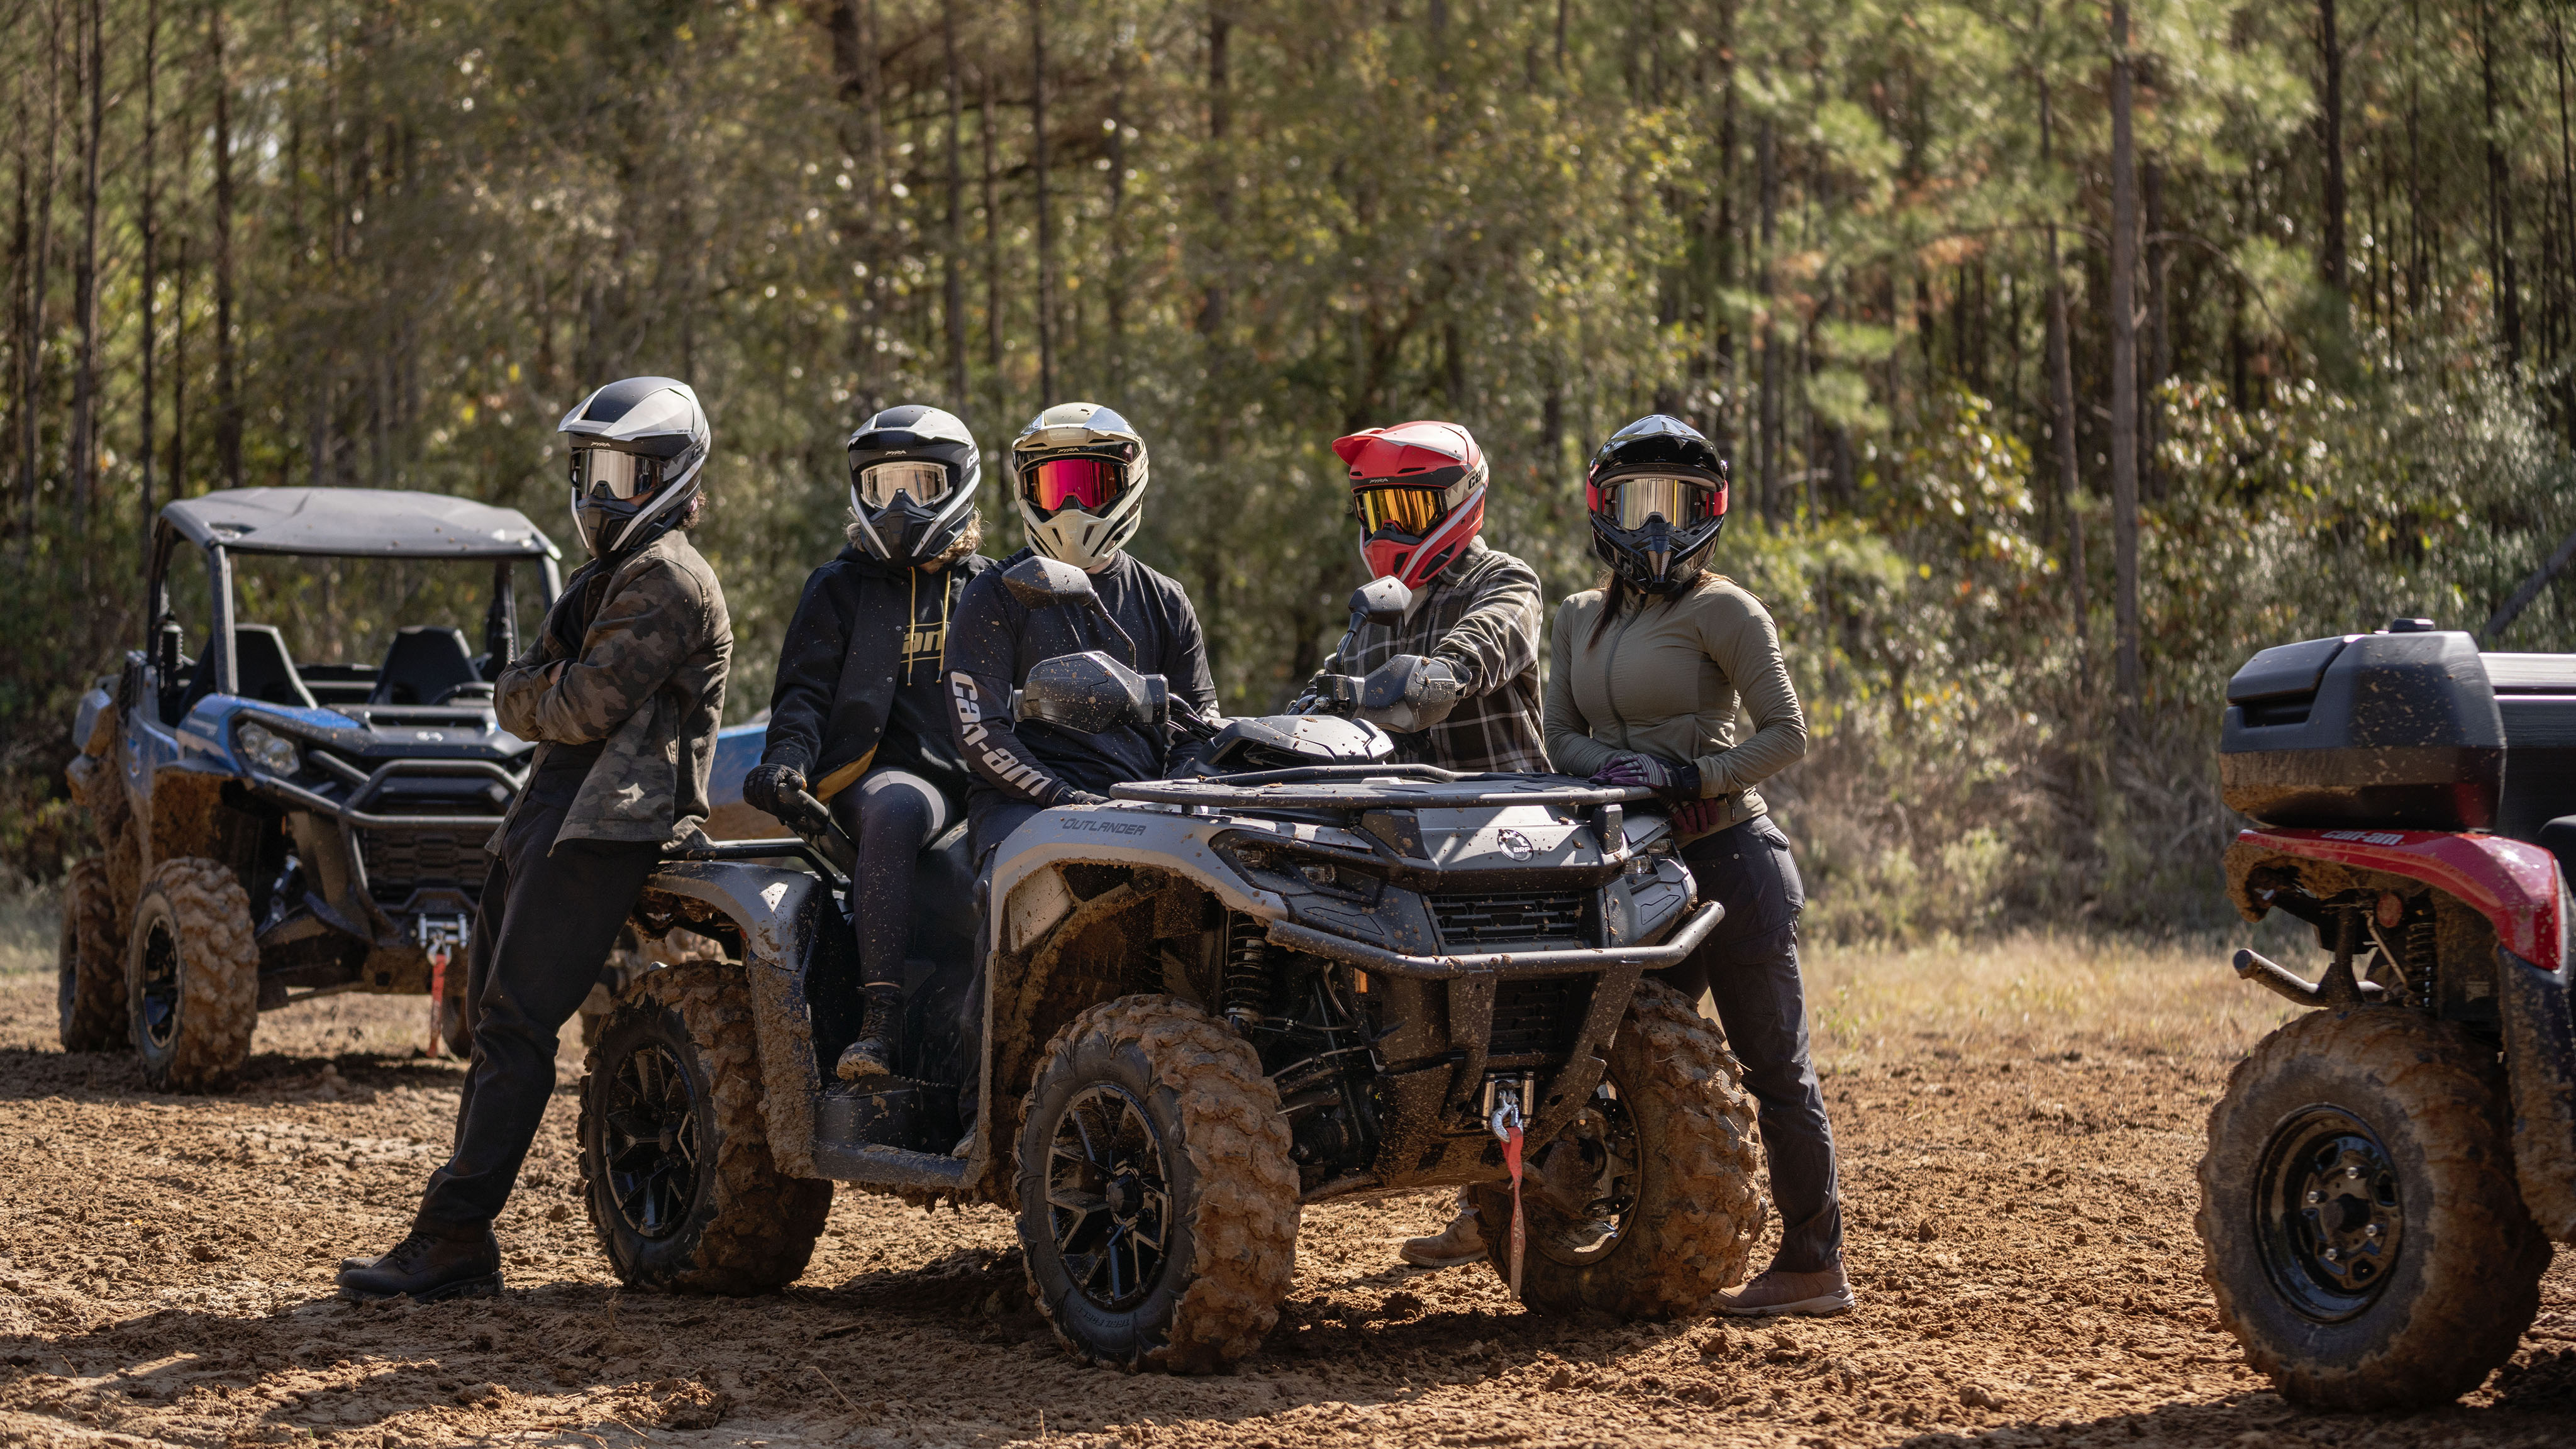 A group of Friends around an Outlander 500/700 on a group trail ride